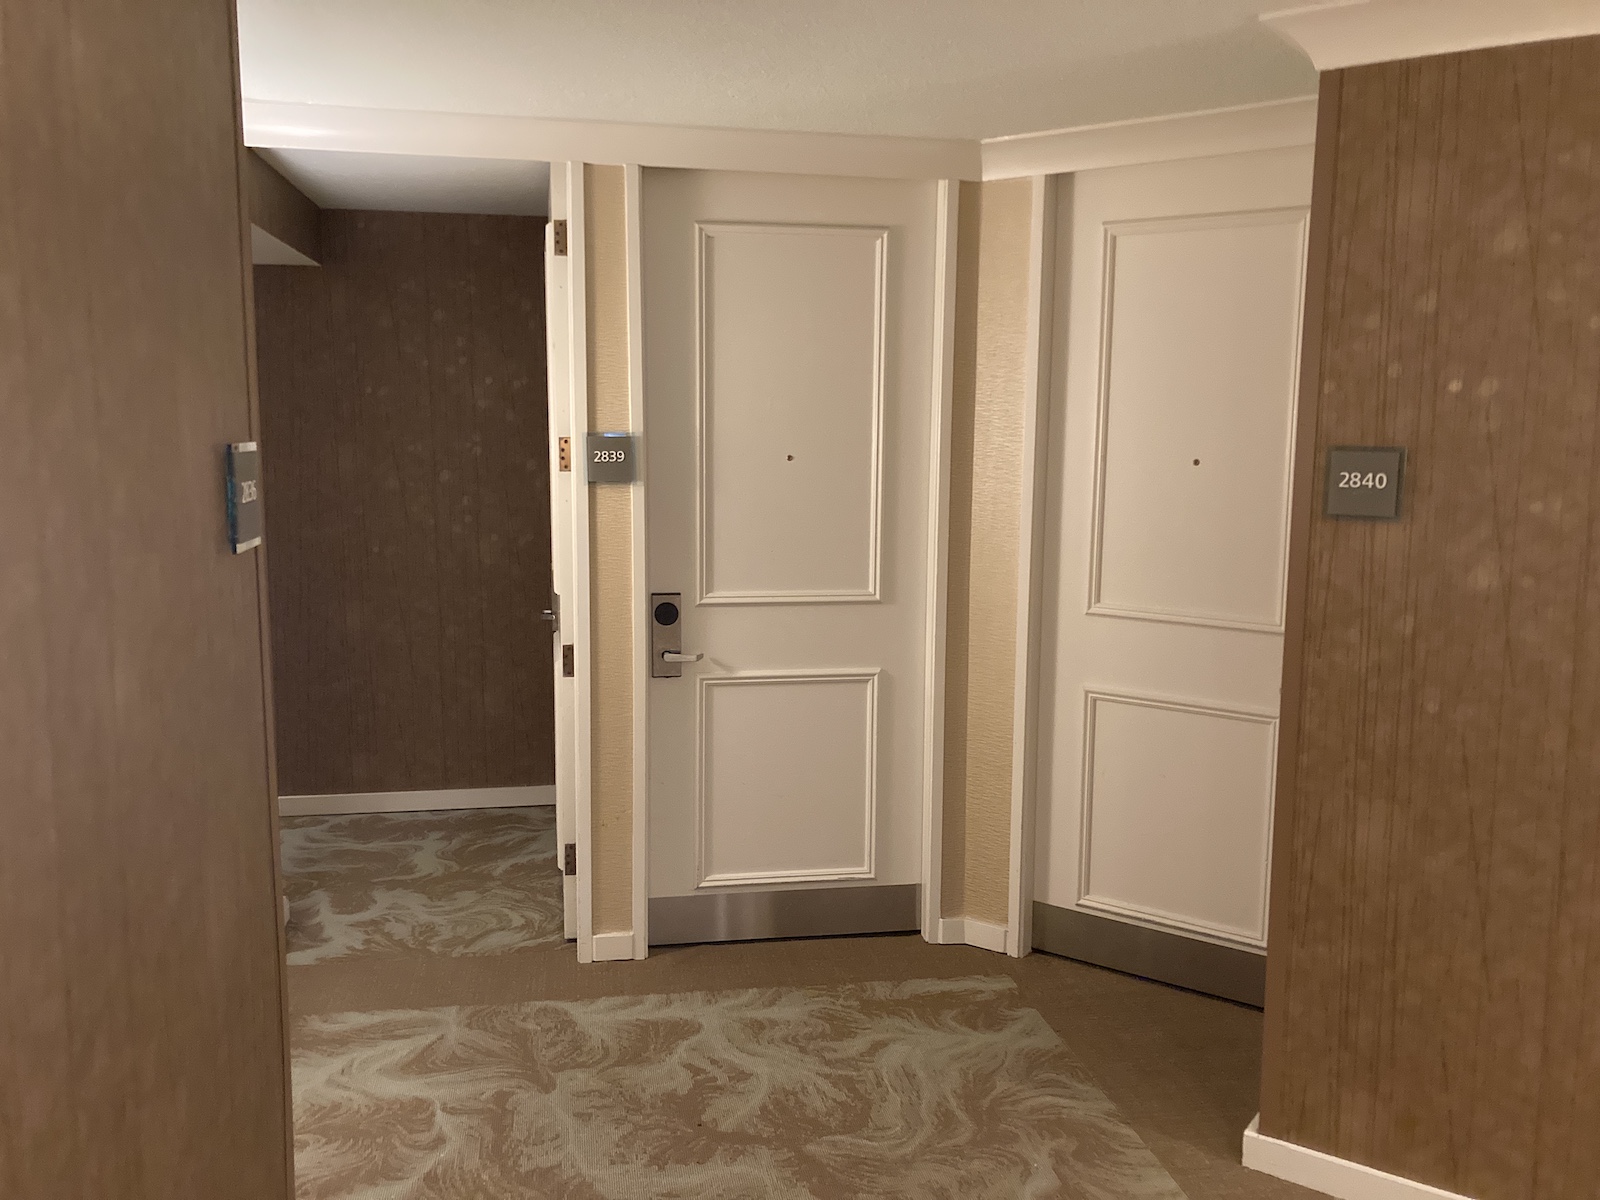 Westin Harbour Castle Toronto Review – It Needs Some Work